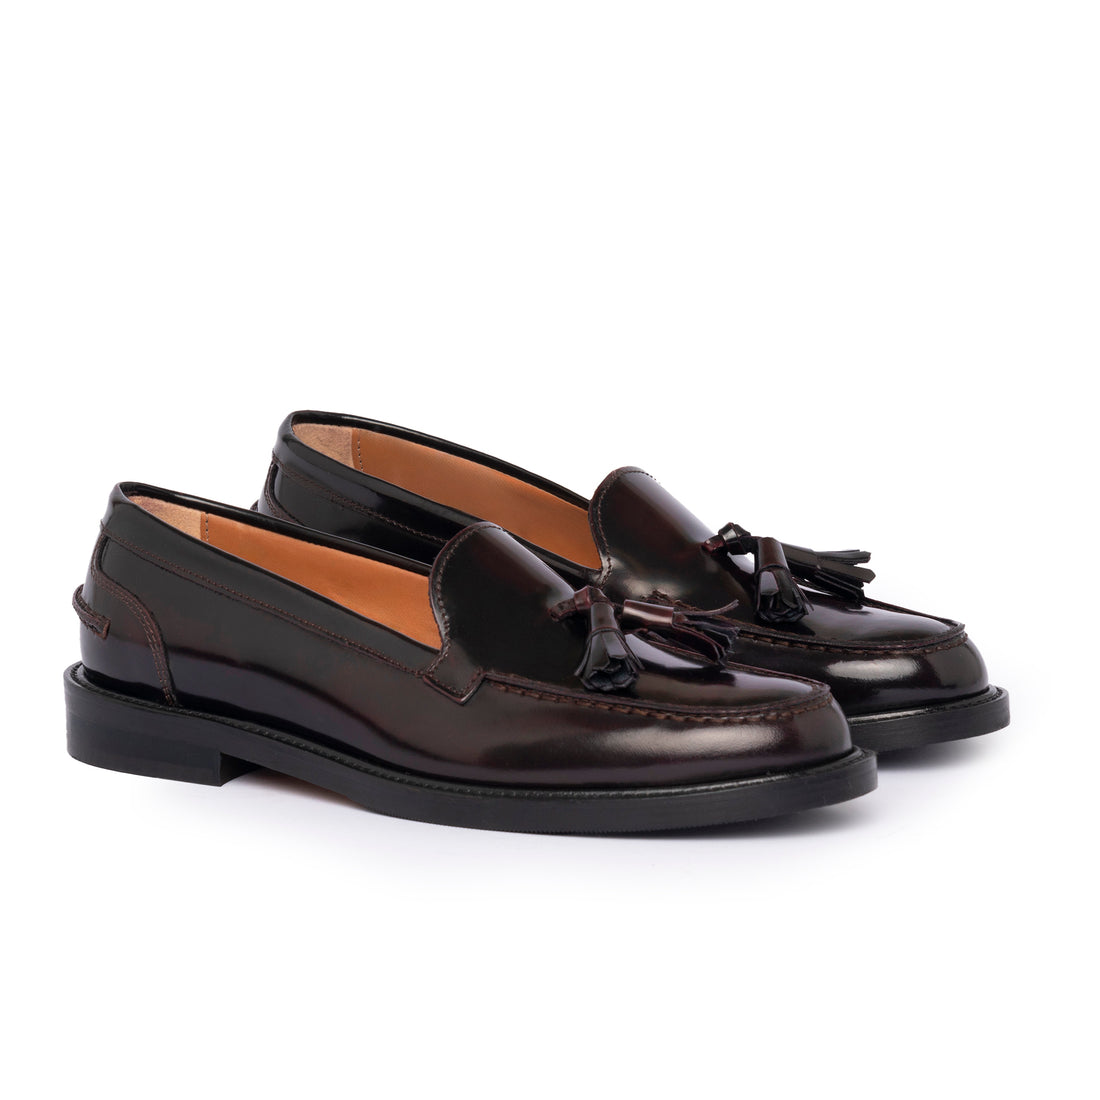 A104PN Women's Loafers with Bow in Leather - Bordeaux